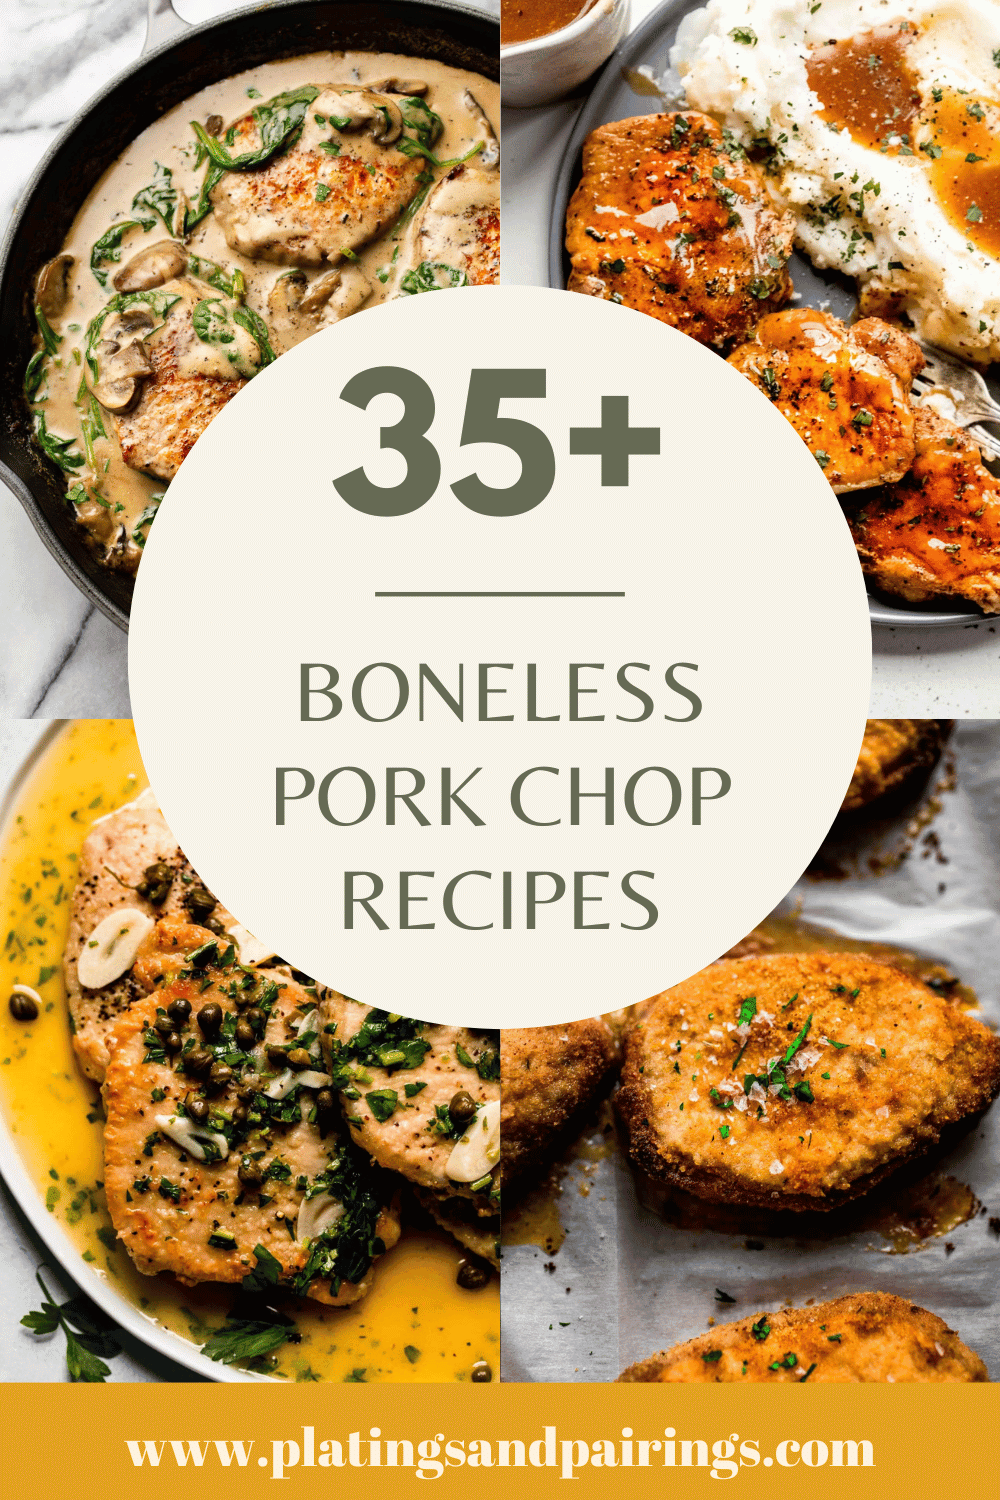 Collage of boneless pork chop recipes with text overlay.